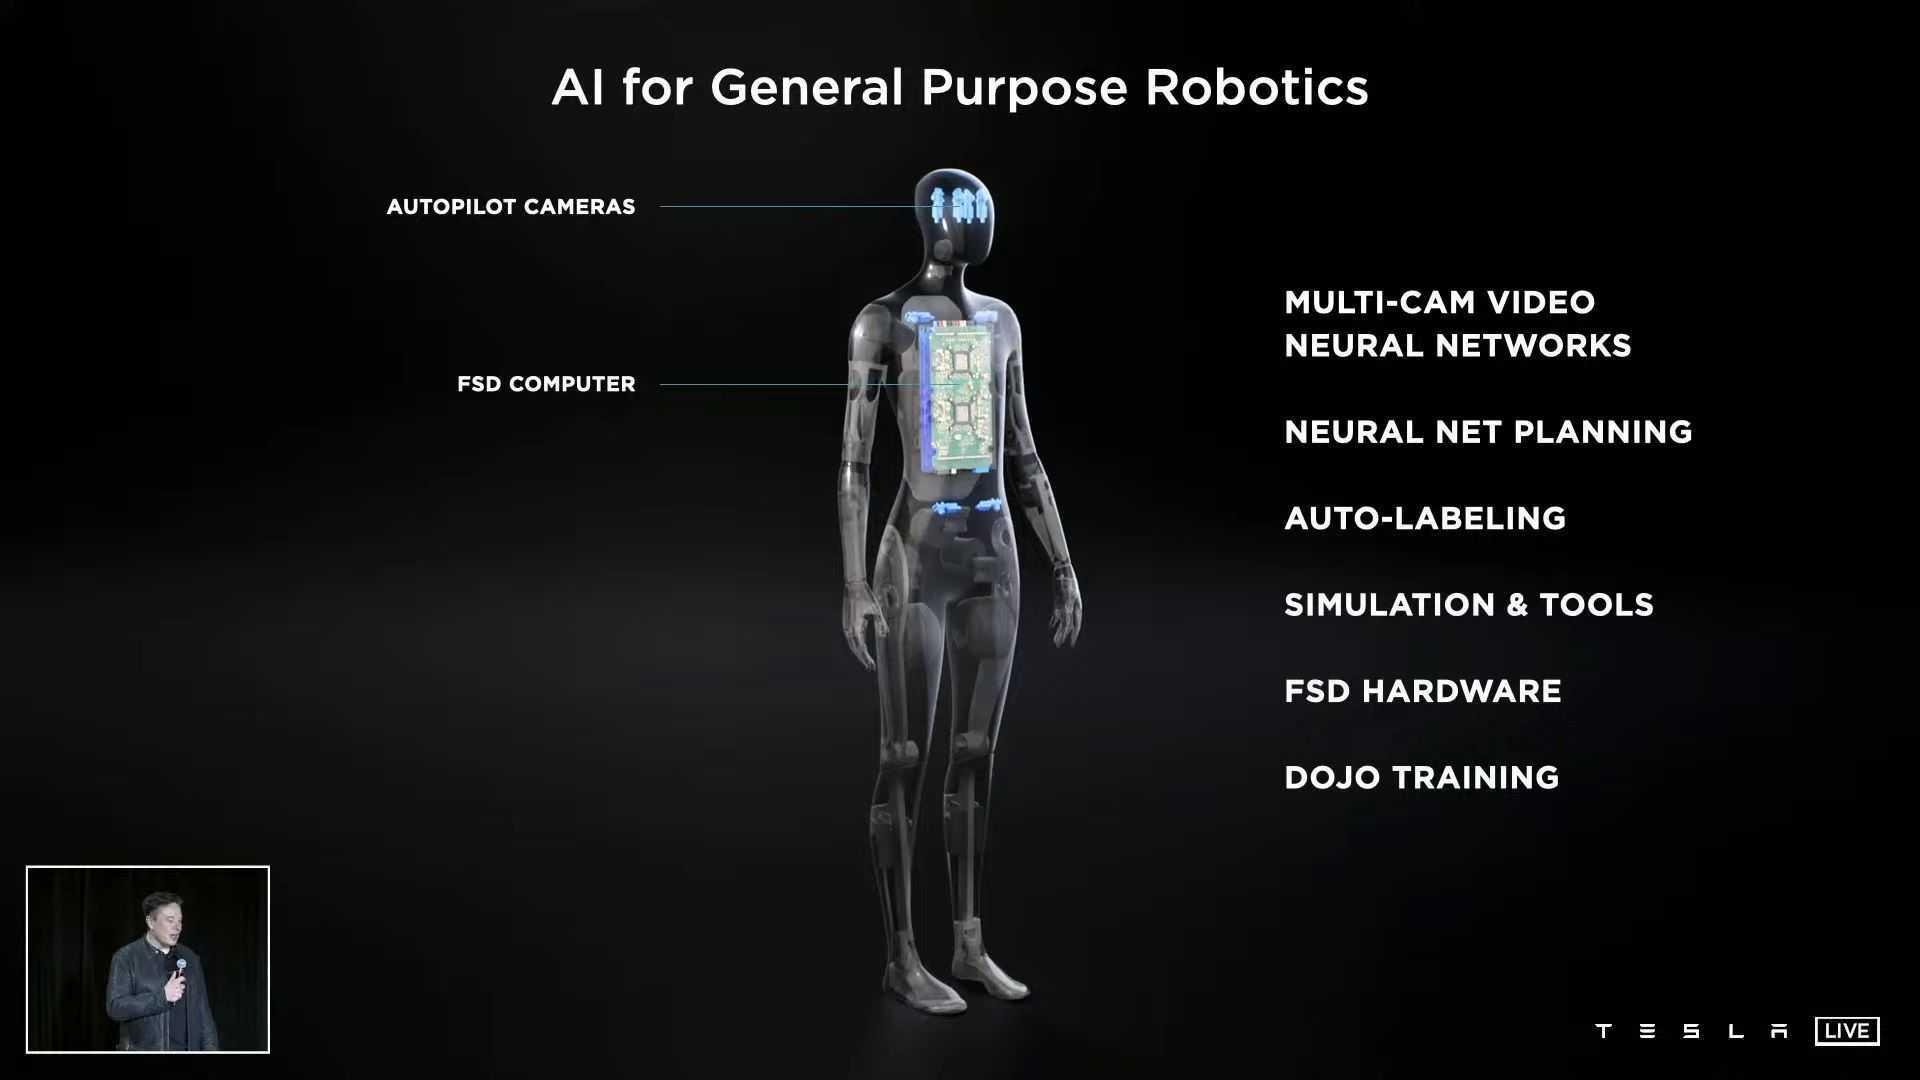 Say hello to the Tesla bot, a humanoid that can take over your boring tasks